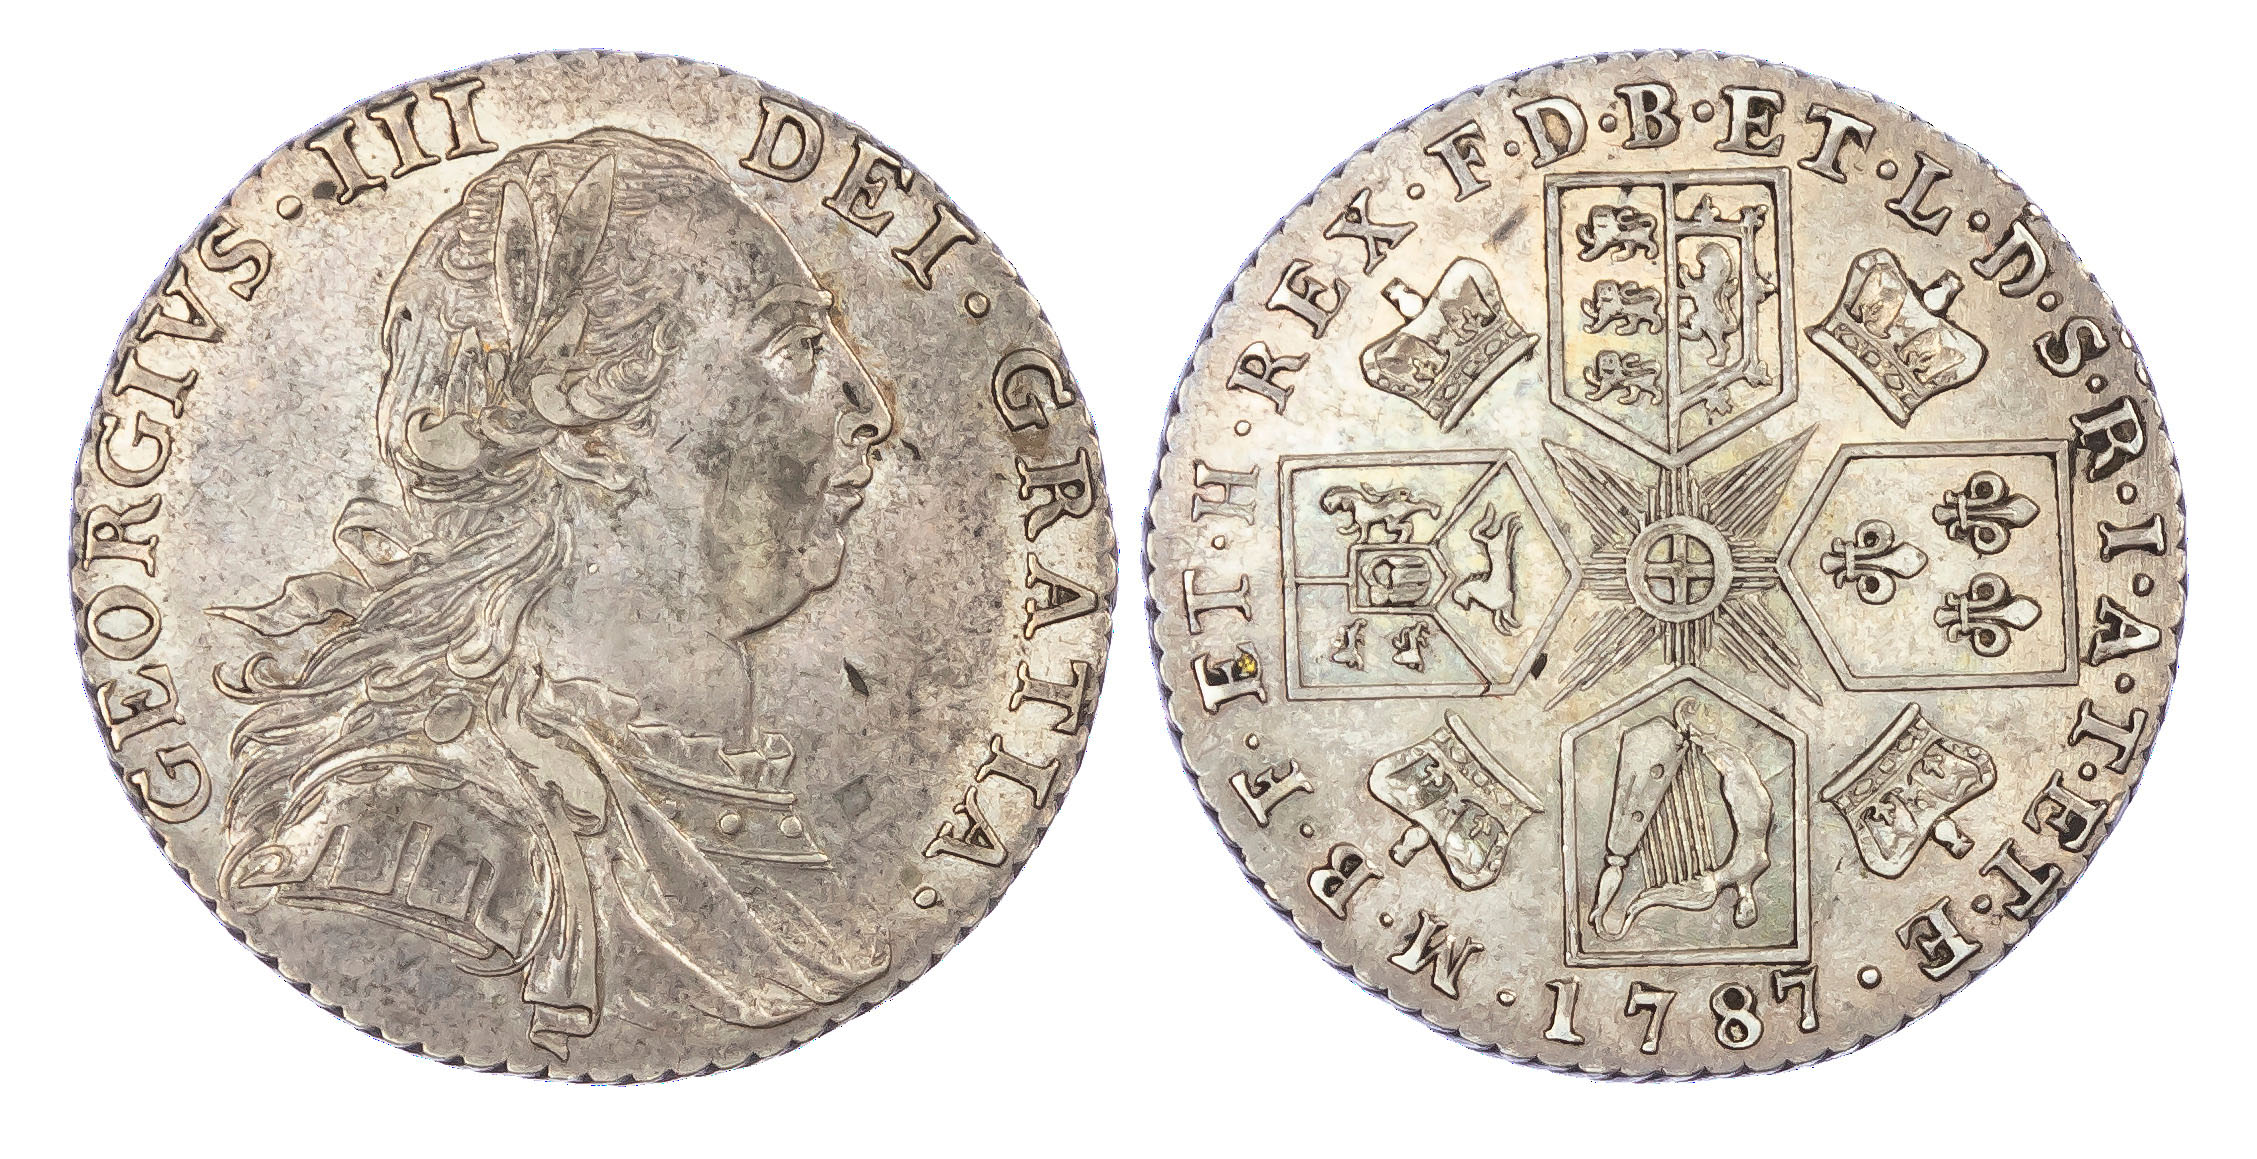 George III (1760-1820), Shilling, 1787, No stop above head